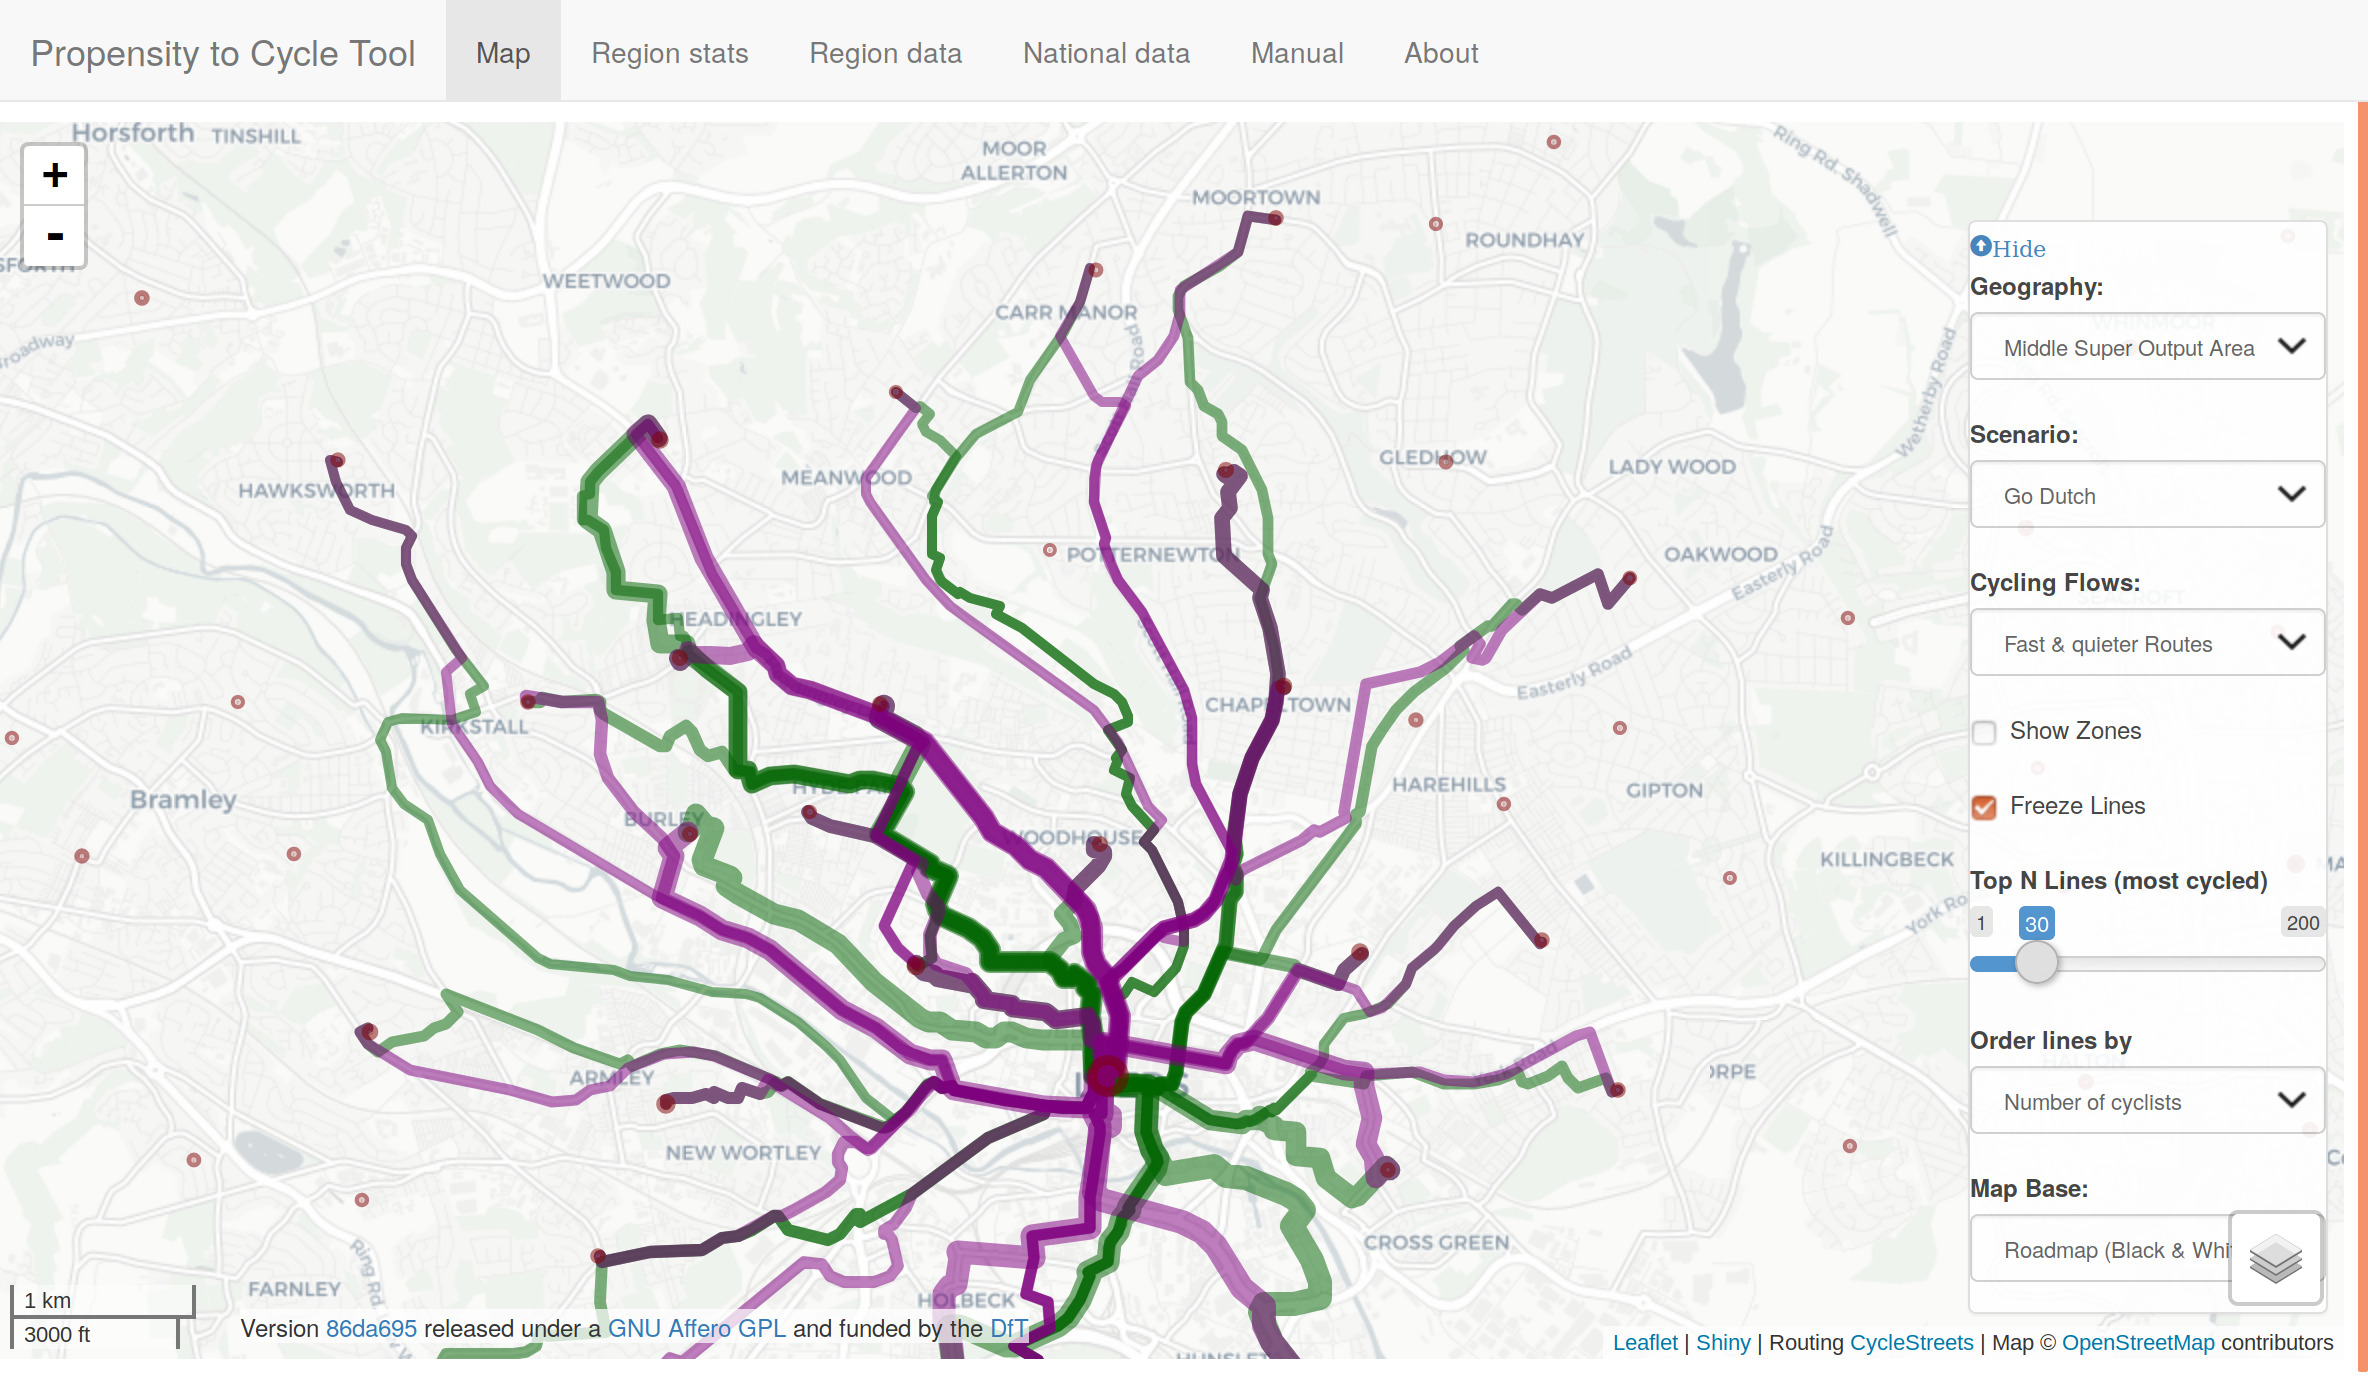 The propensity to cycle tool (PCT), showing data for fast and quiet routes, and demonstrating the Region dat' tab. Go to www.pct.bike to explore the data.